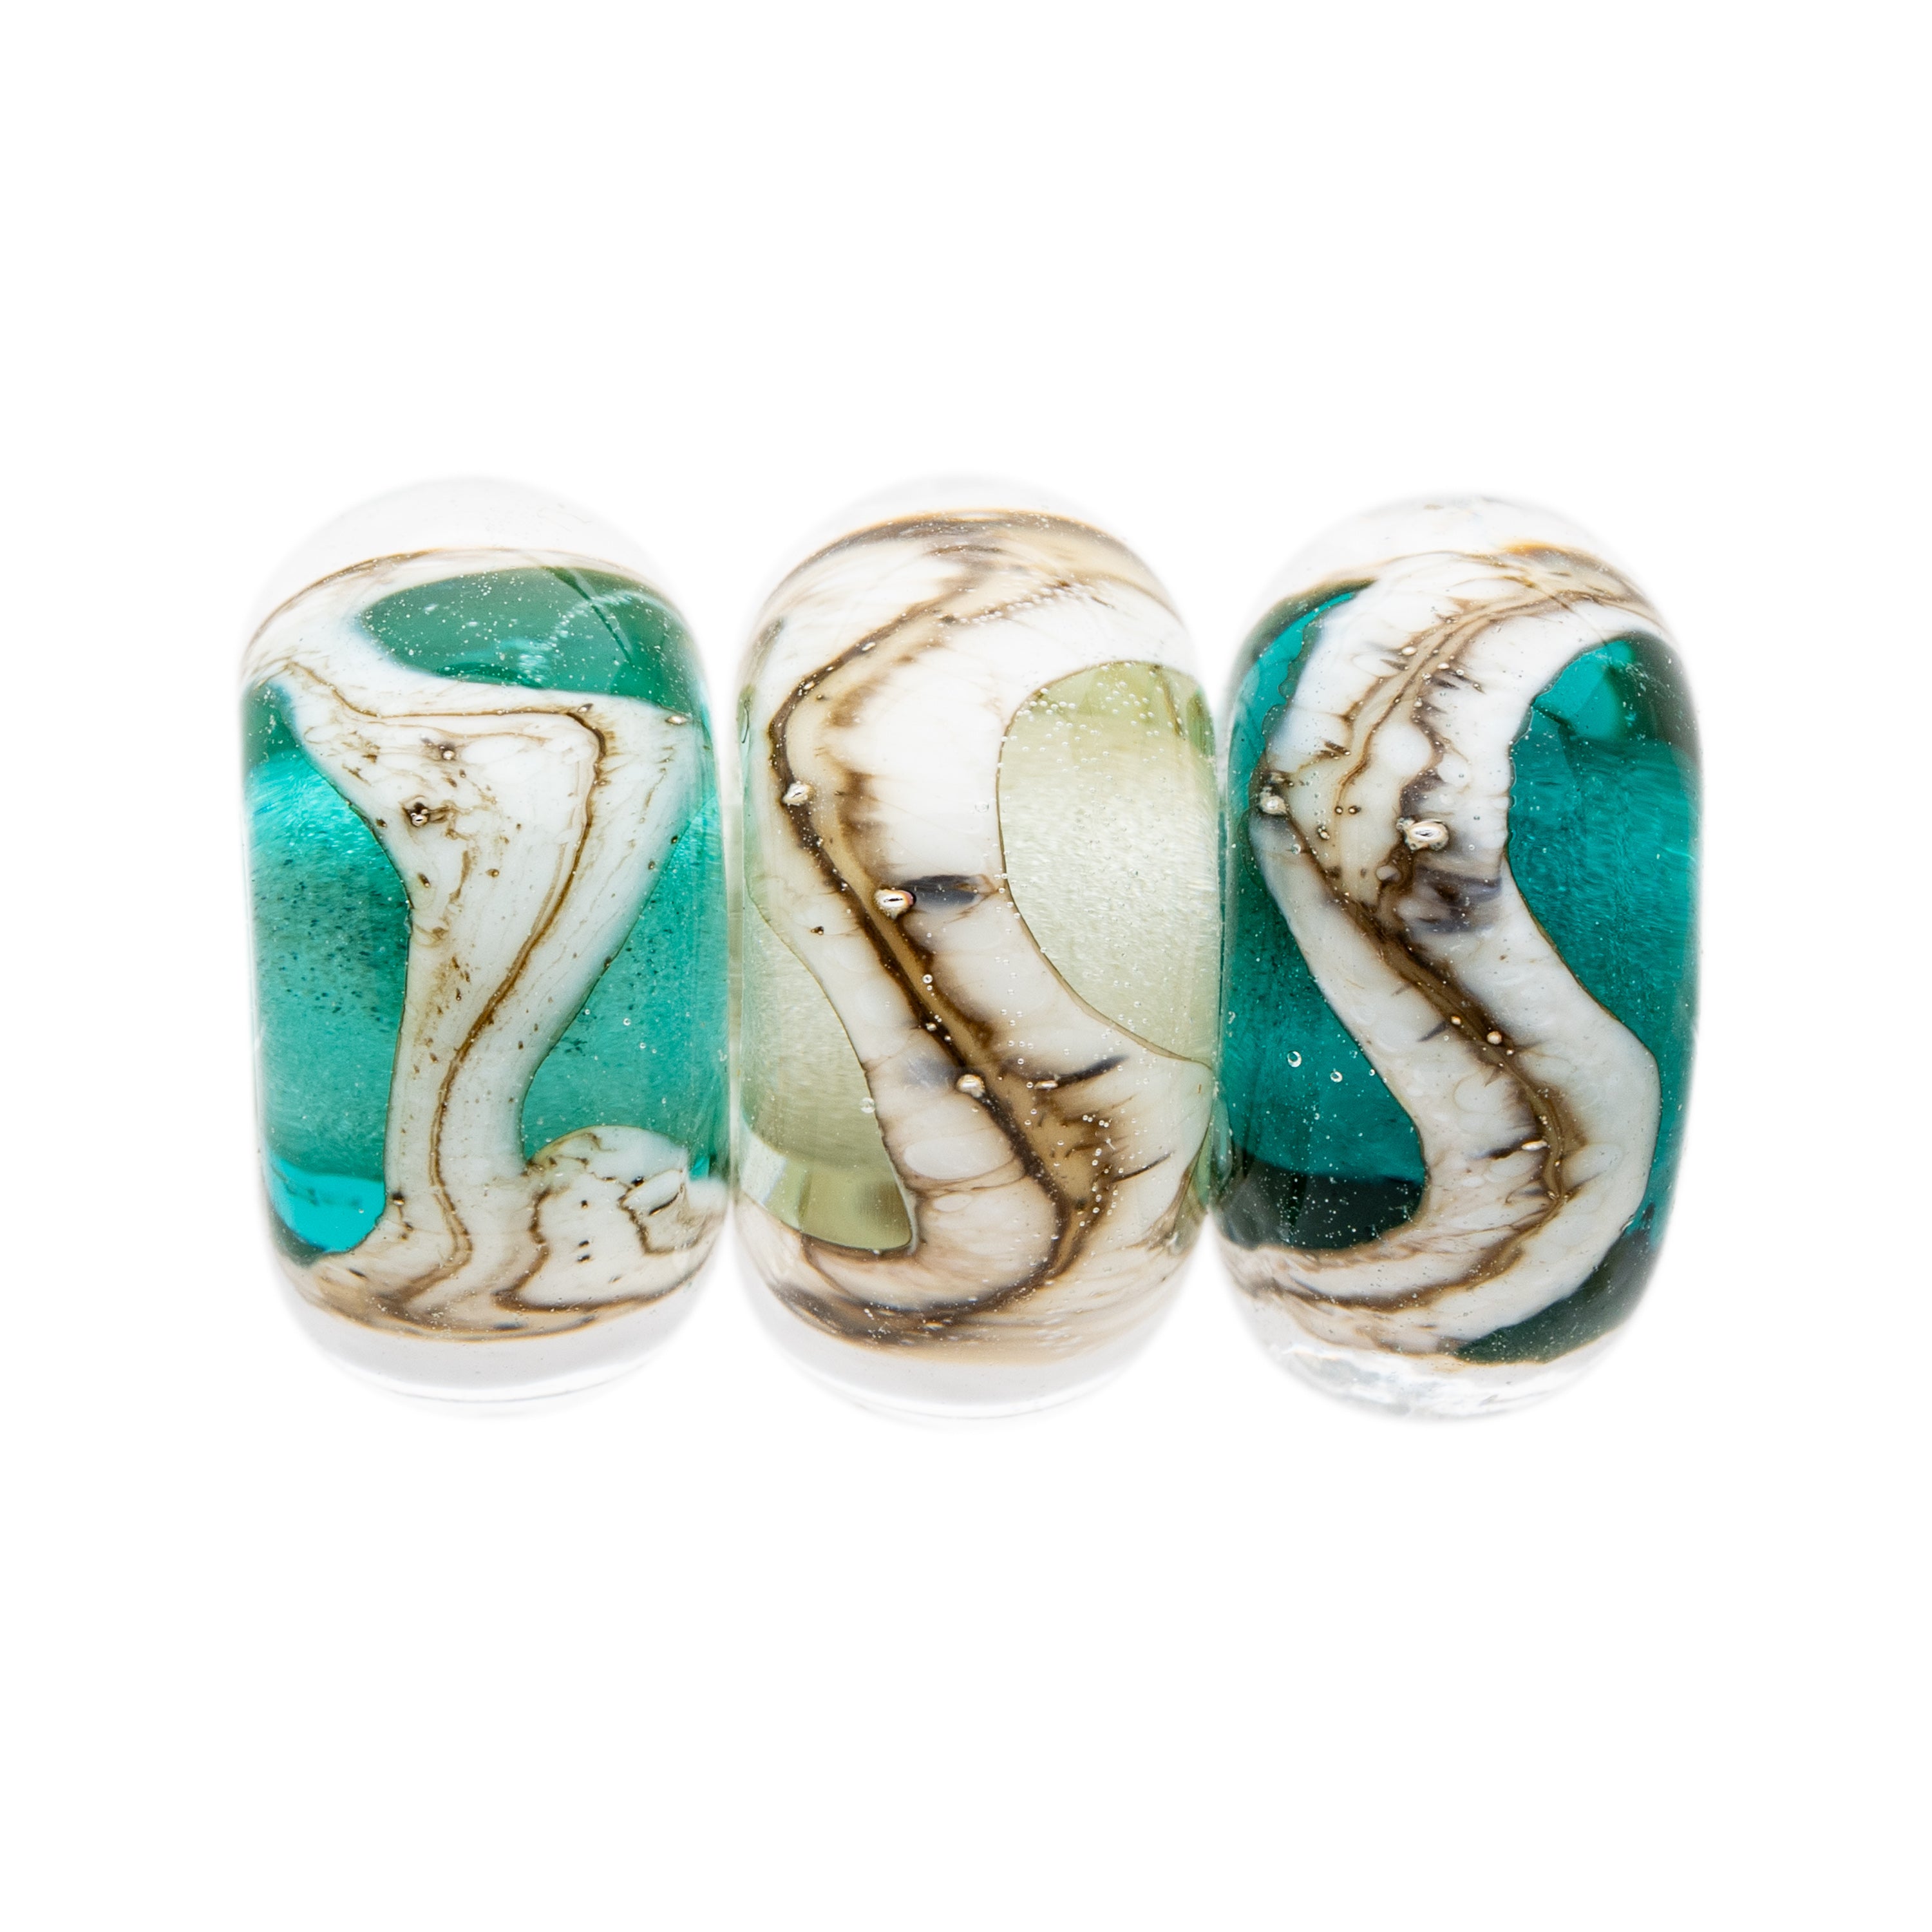 Teal, Sea Glass, Dark Teal glass beads wrapped with swirling silver sand pattern, representing the Cornish coastline.